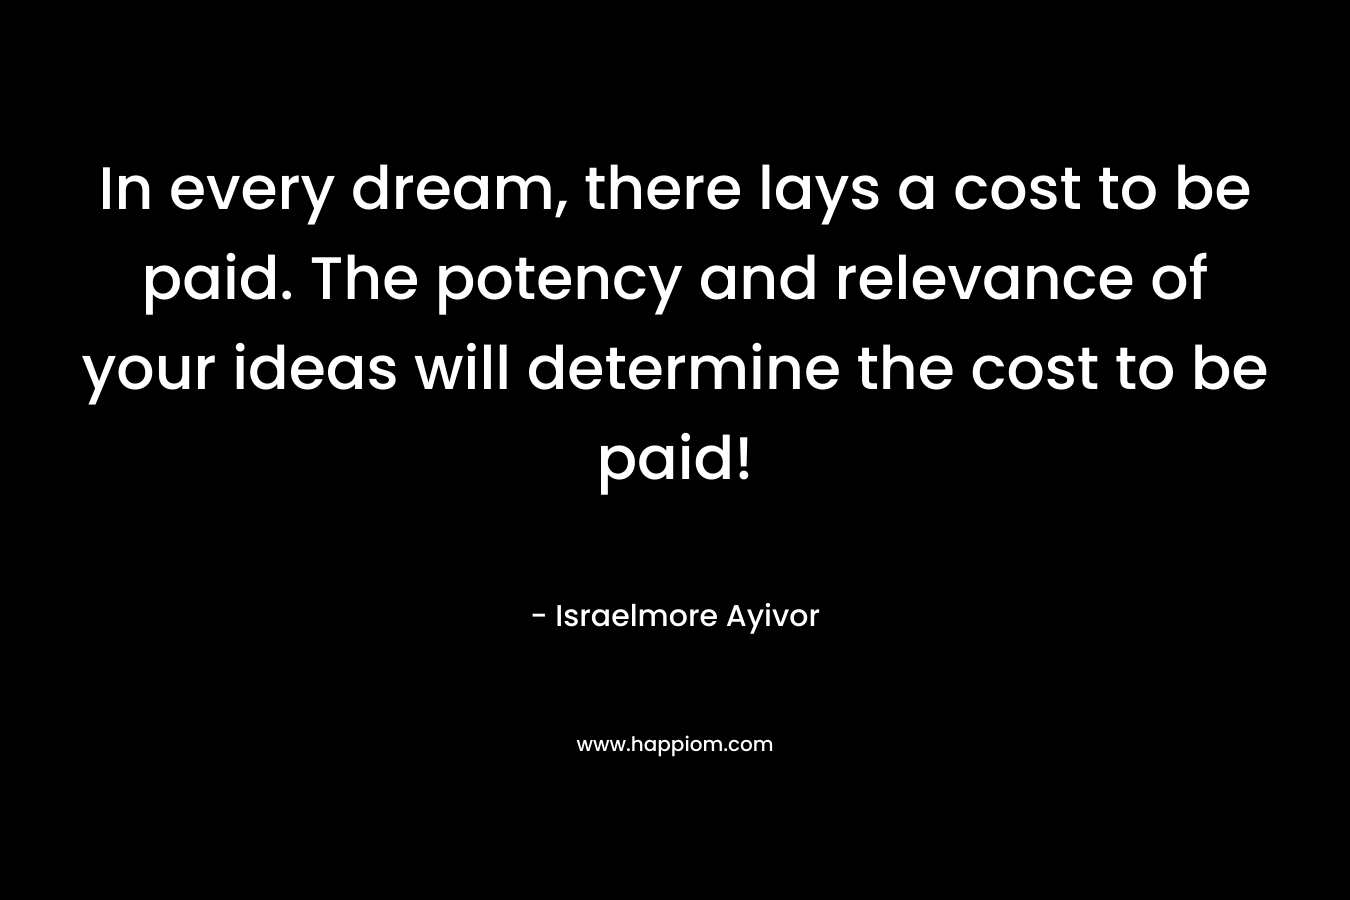 In every dream, there lays a cost to be paid. The potency and relevance of your ideas will determine the cost to be paid!